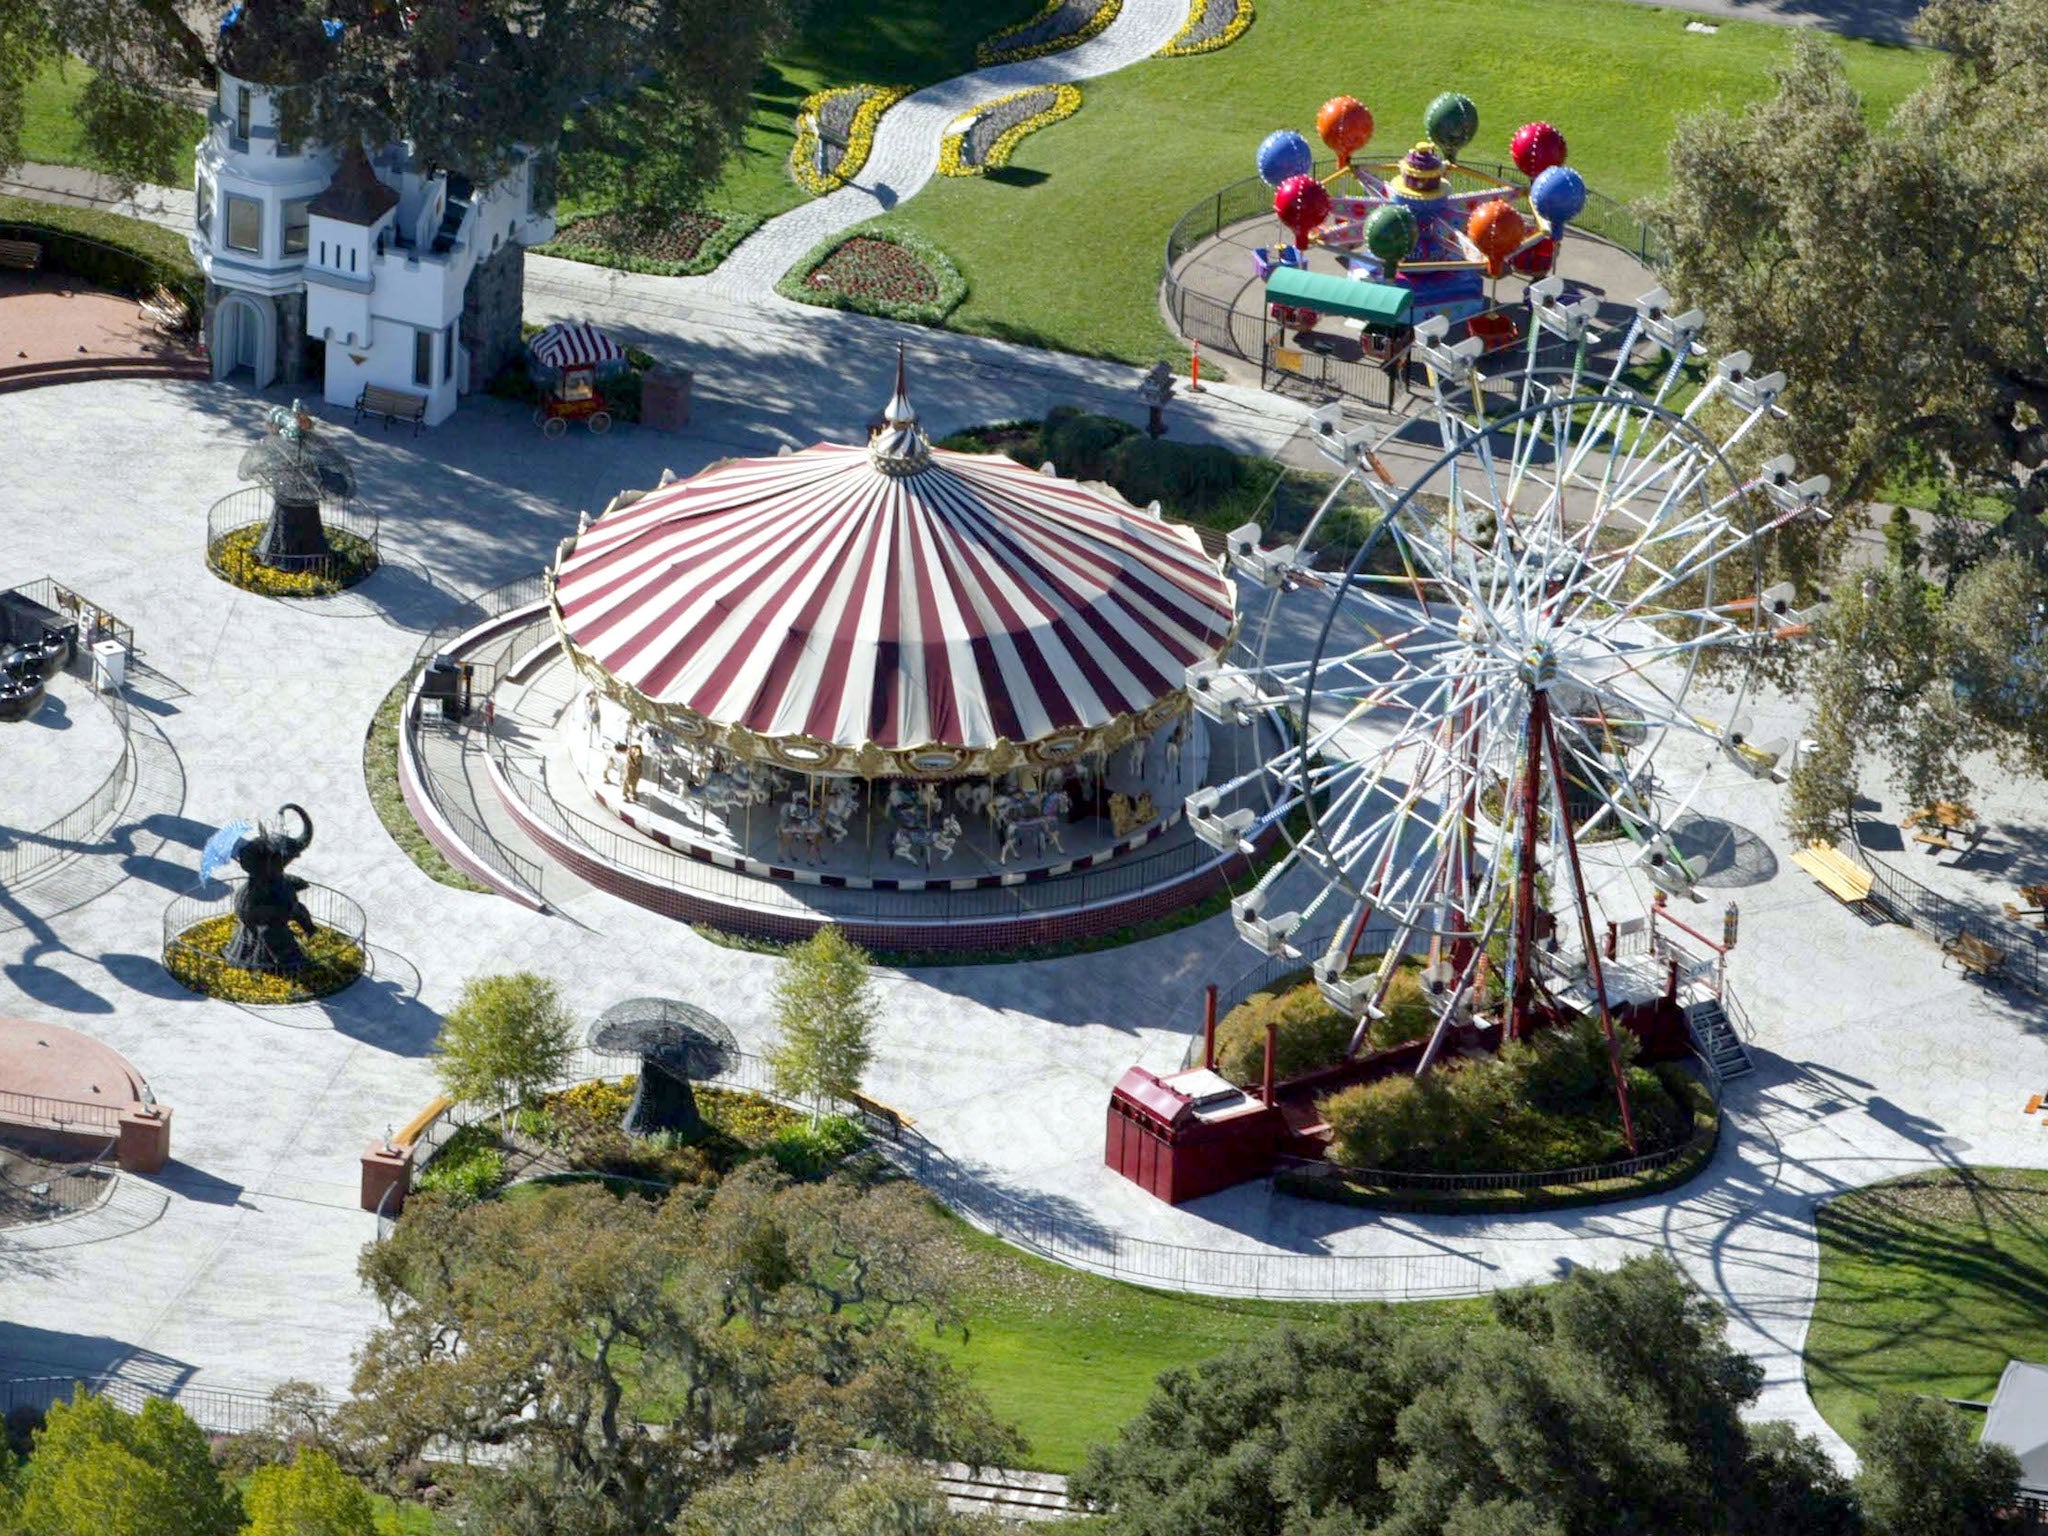 The outdoor fairground is pictured at Neverland Ranch, a 2,700-acre property formerly owned by King of Pop Michael Jackson in California’s Santa Ynez Valley